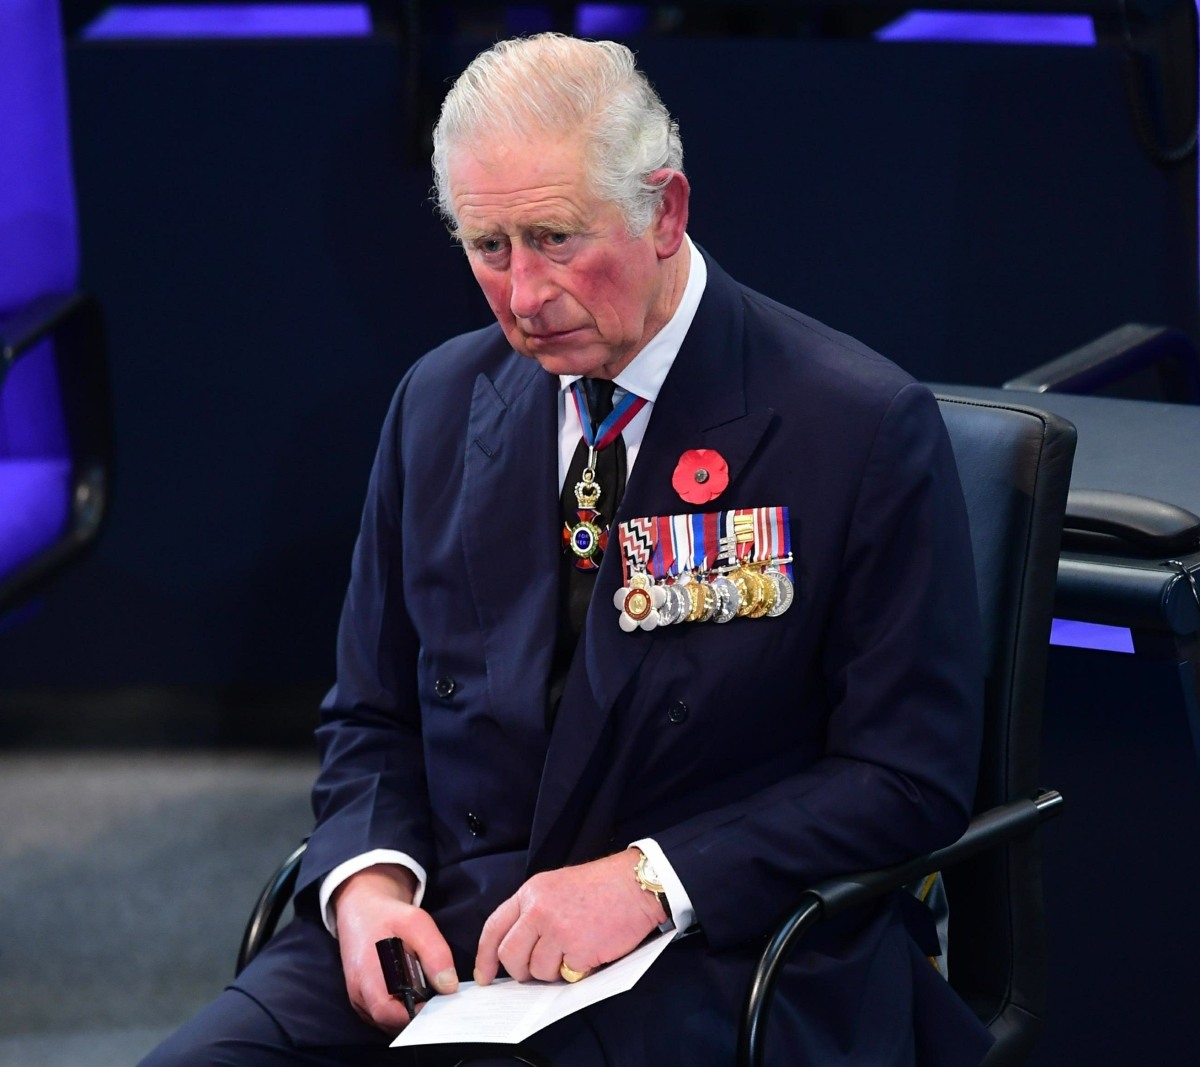 Prince Charles And Camilla visit Berlin To Attend National Mourning Day Events